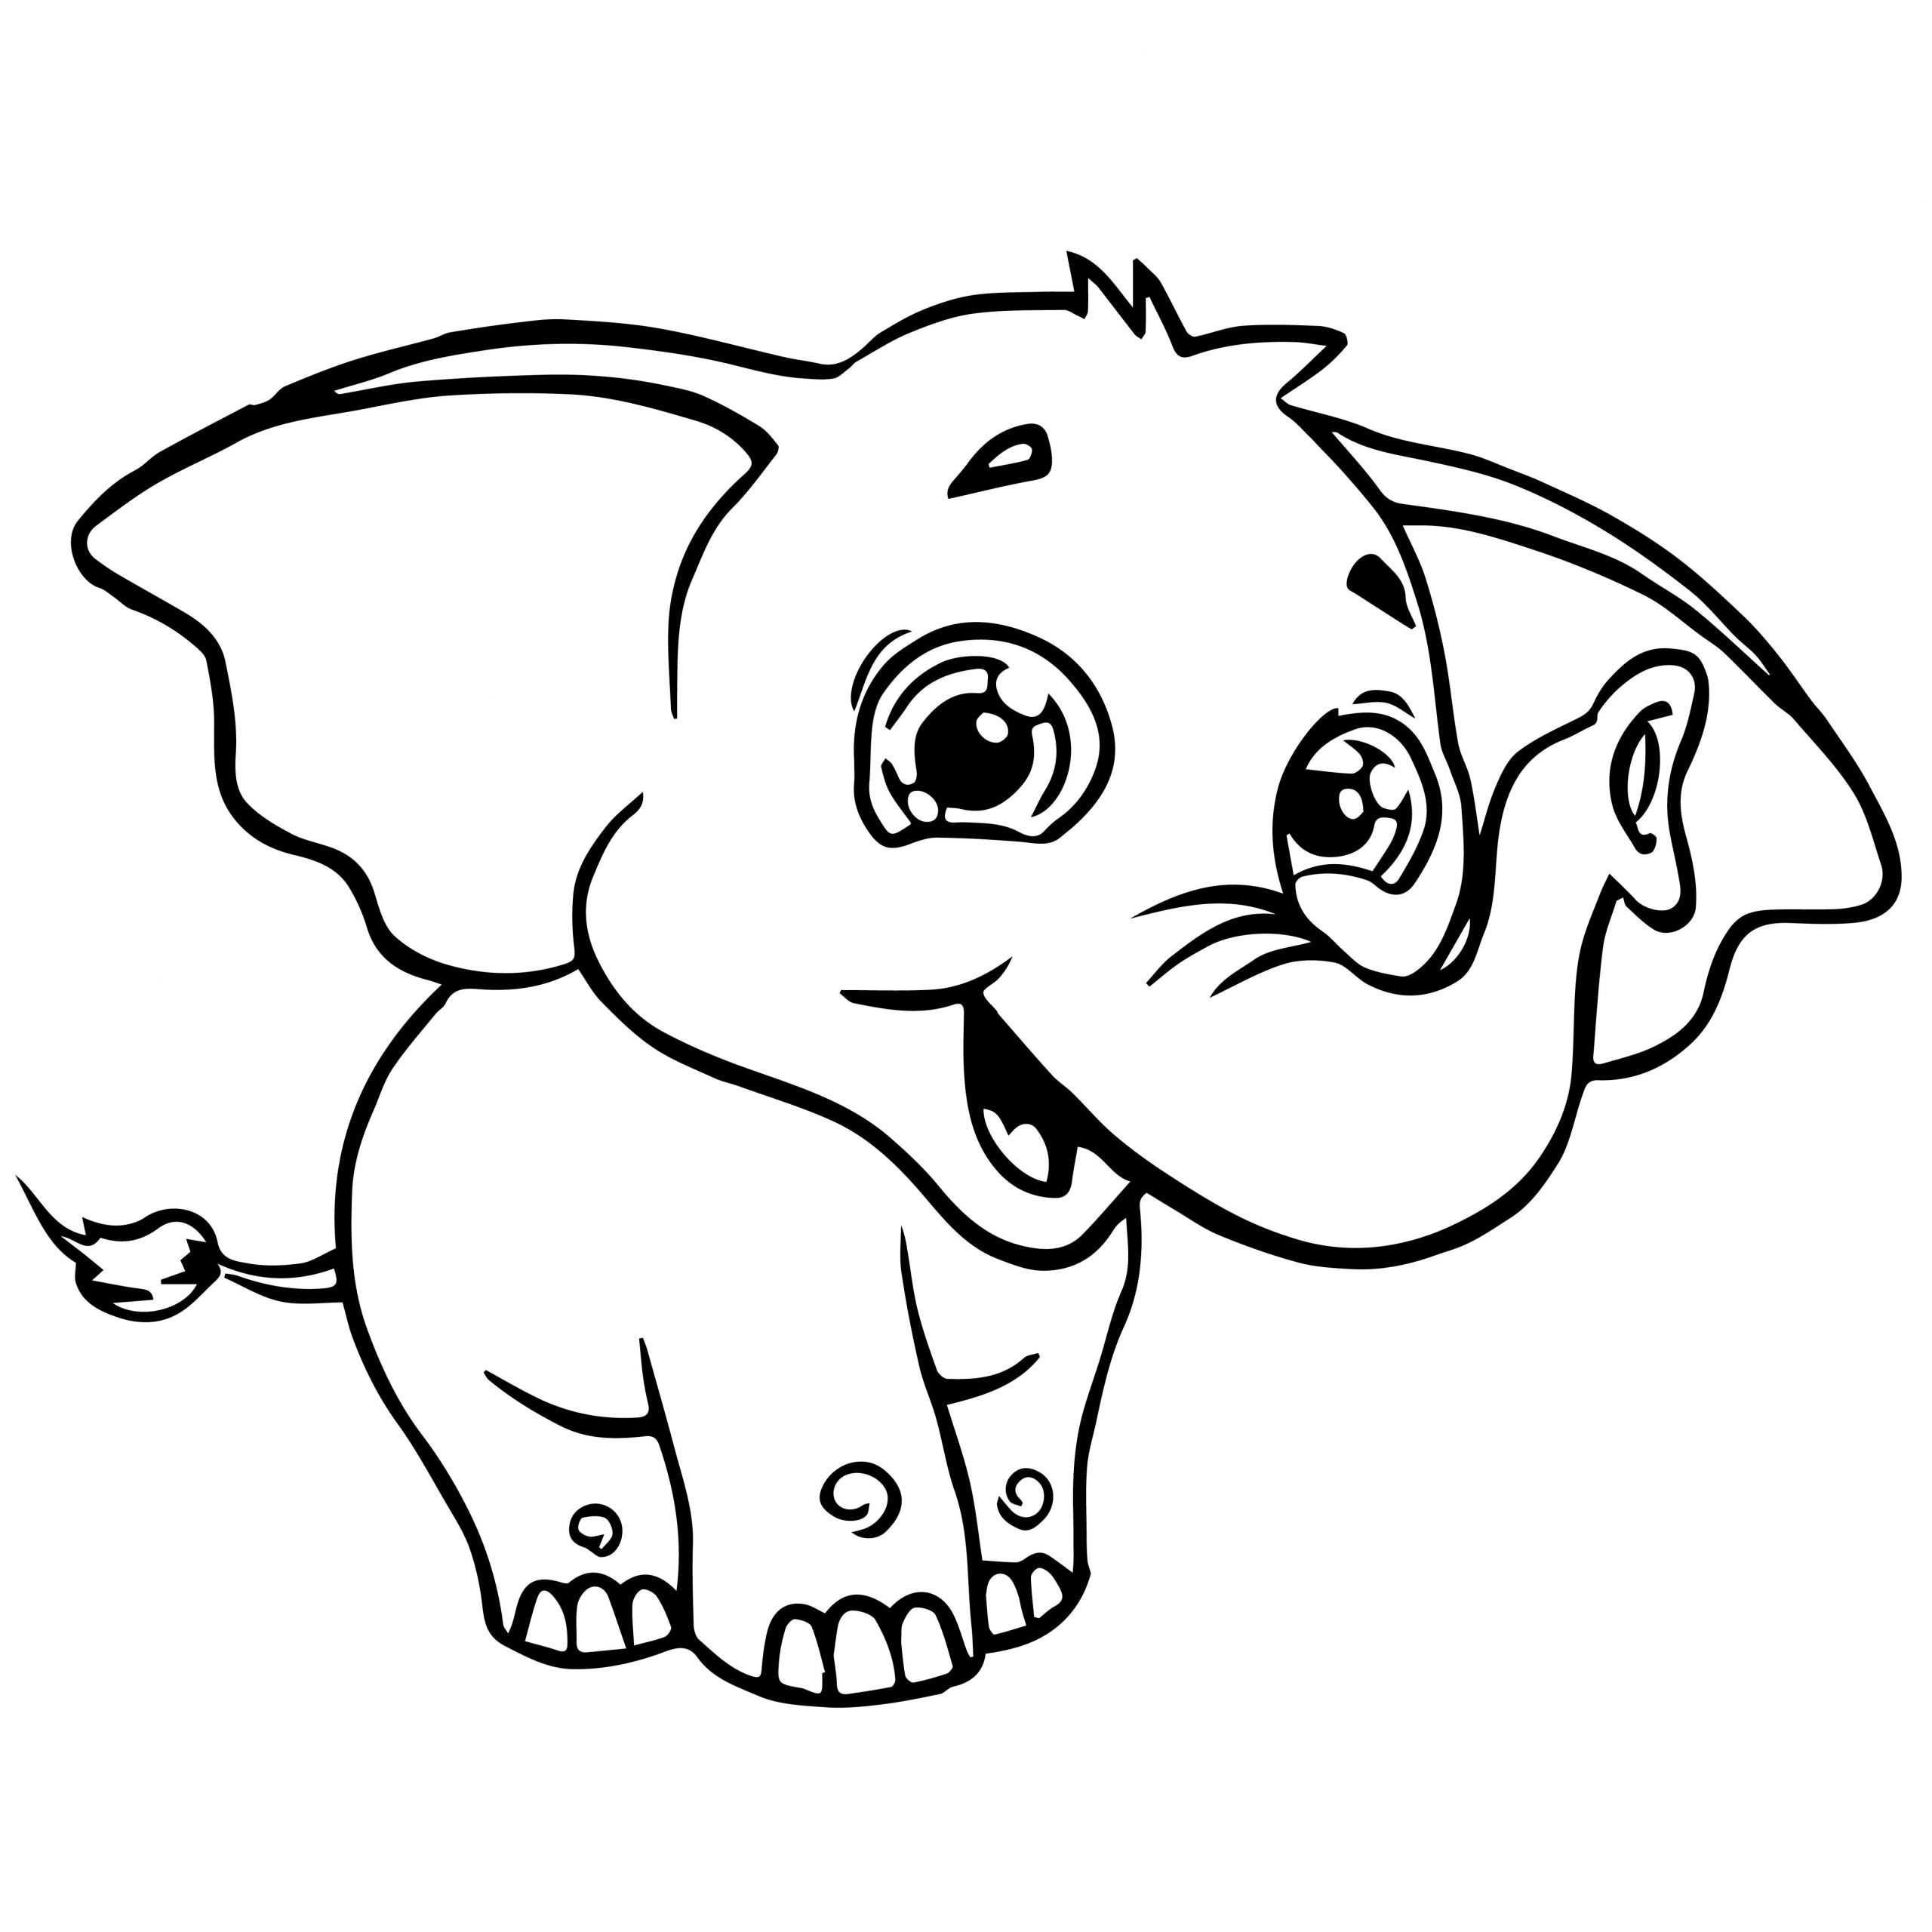 Baby Elephant Coloring Pages
 Sweety Elephant Coloring Page